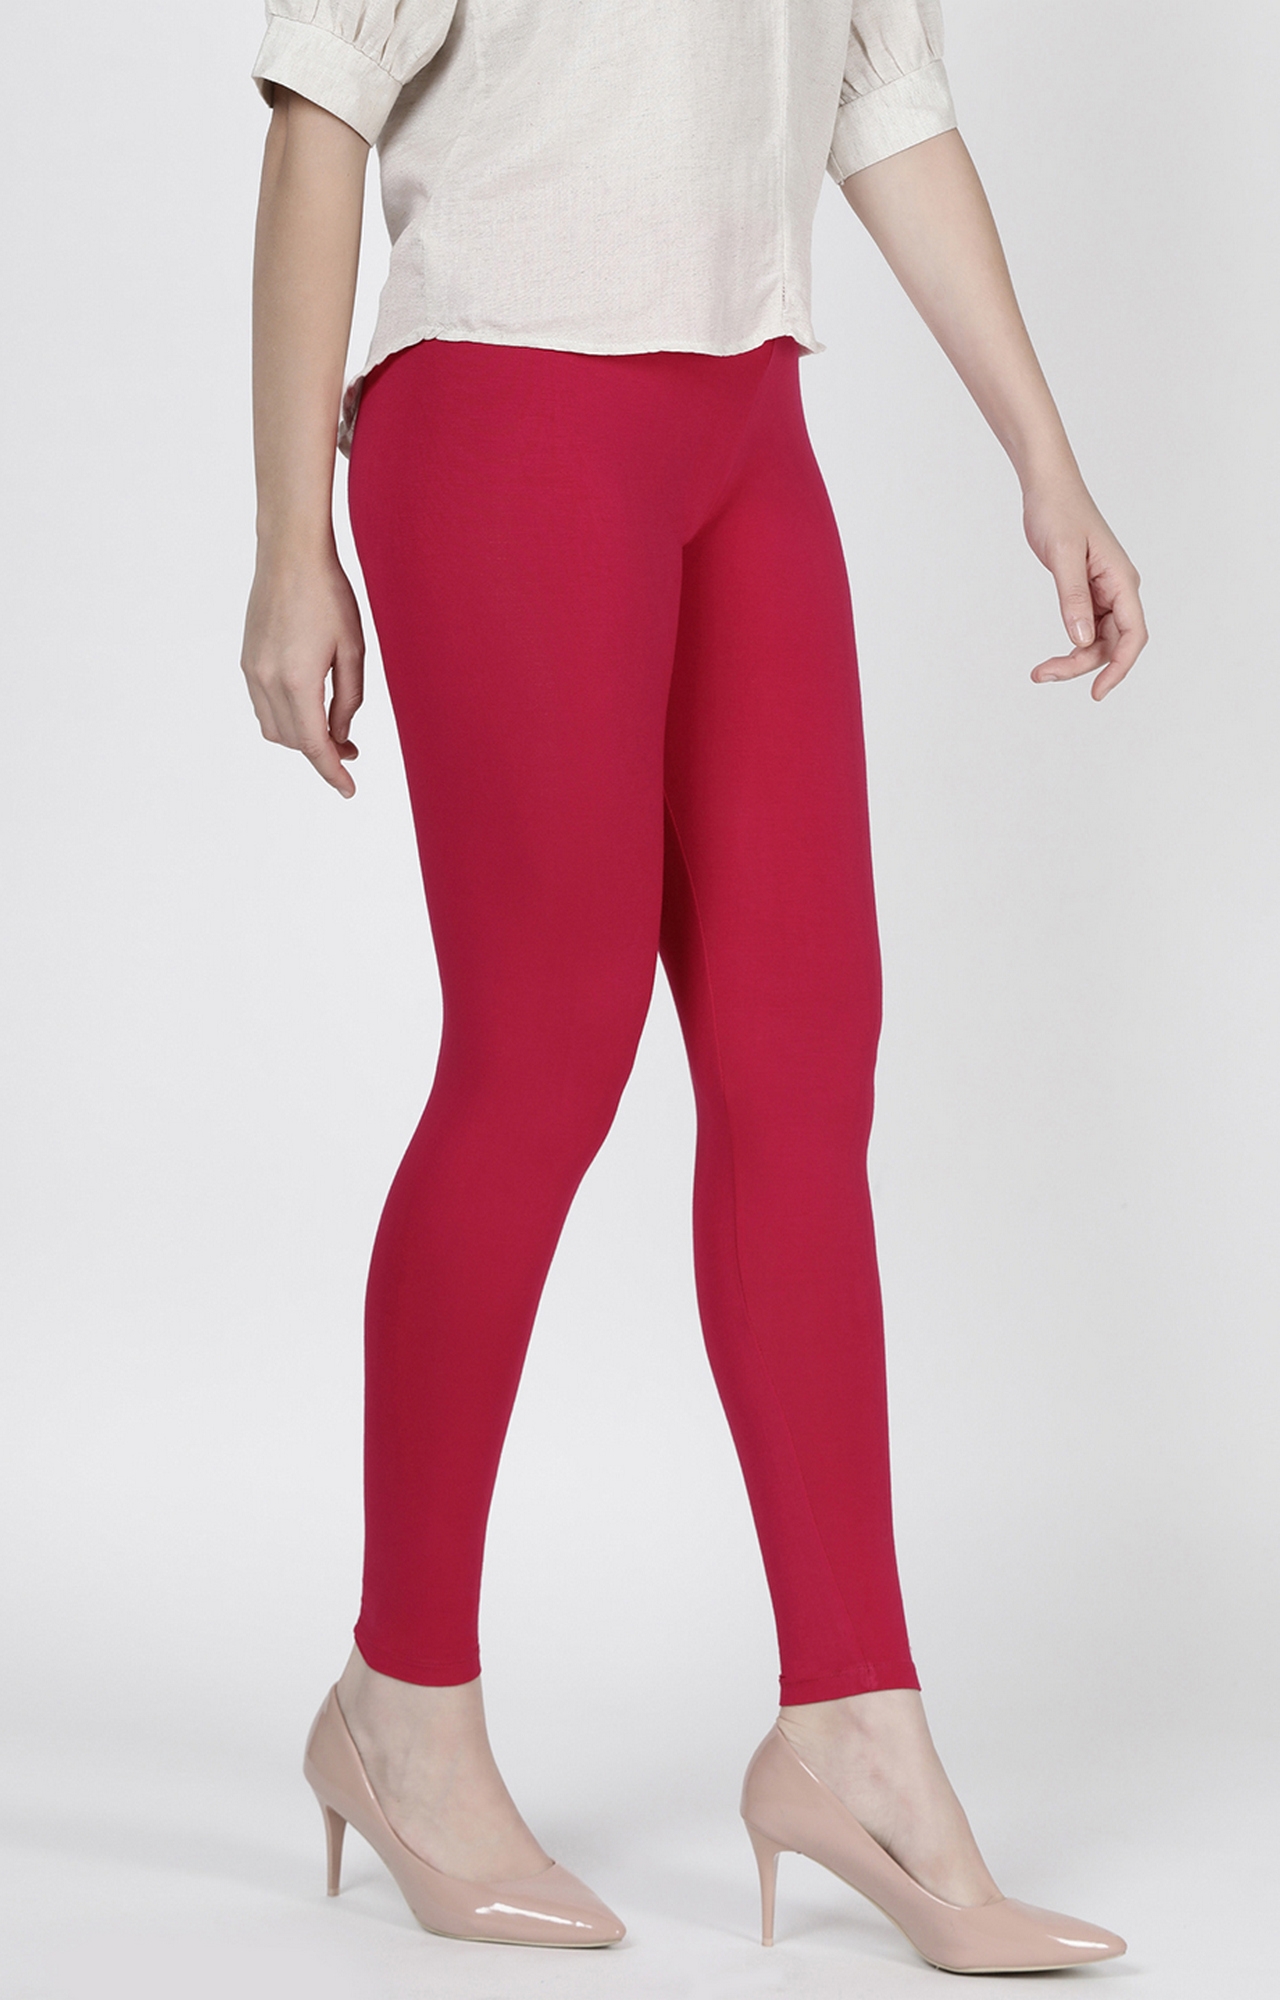 Twinbirds Rose Red Solid Ankle Legging